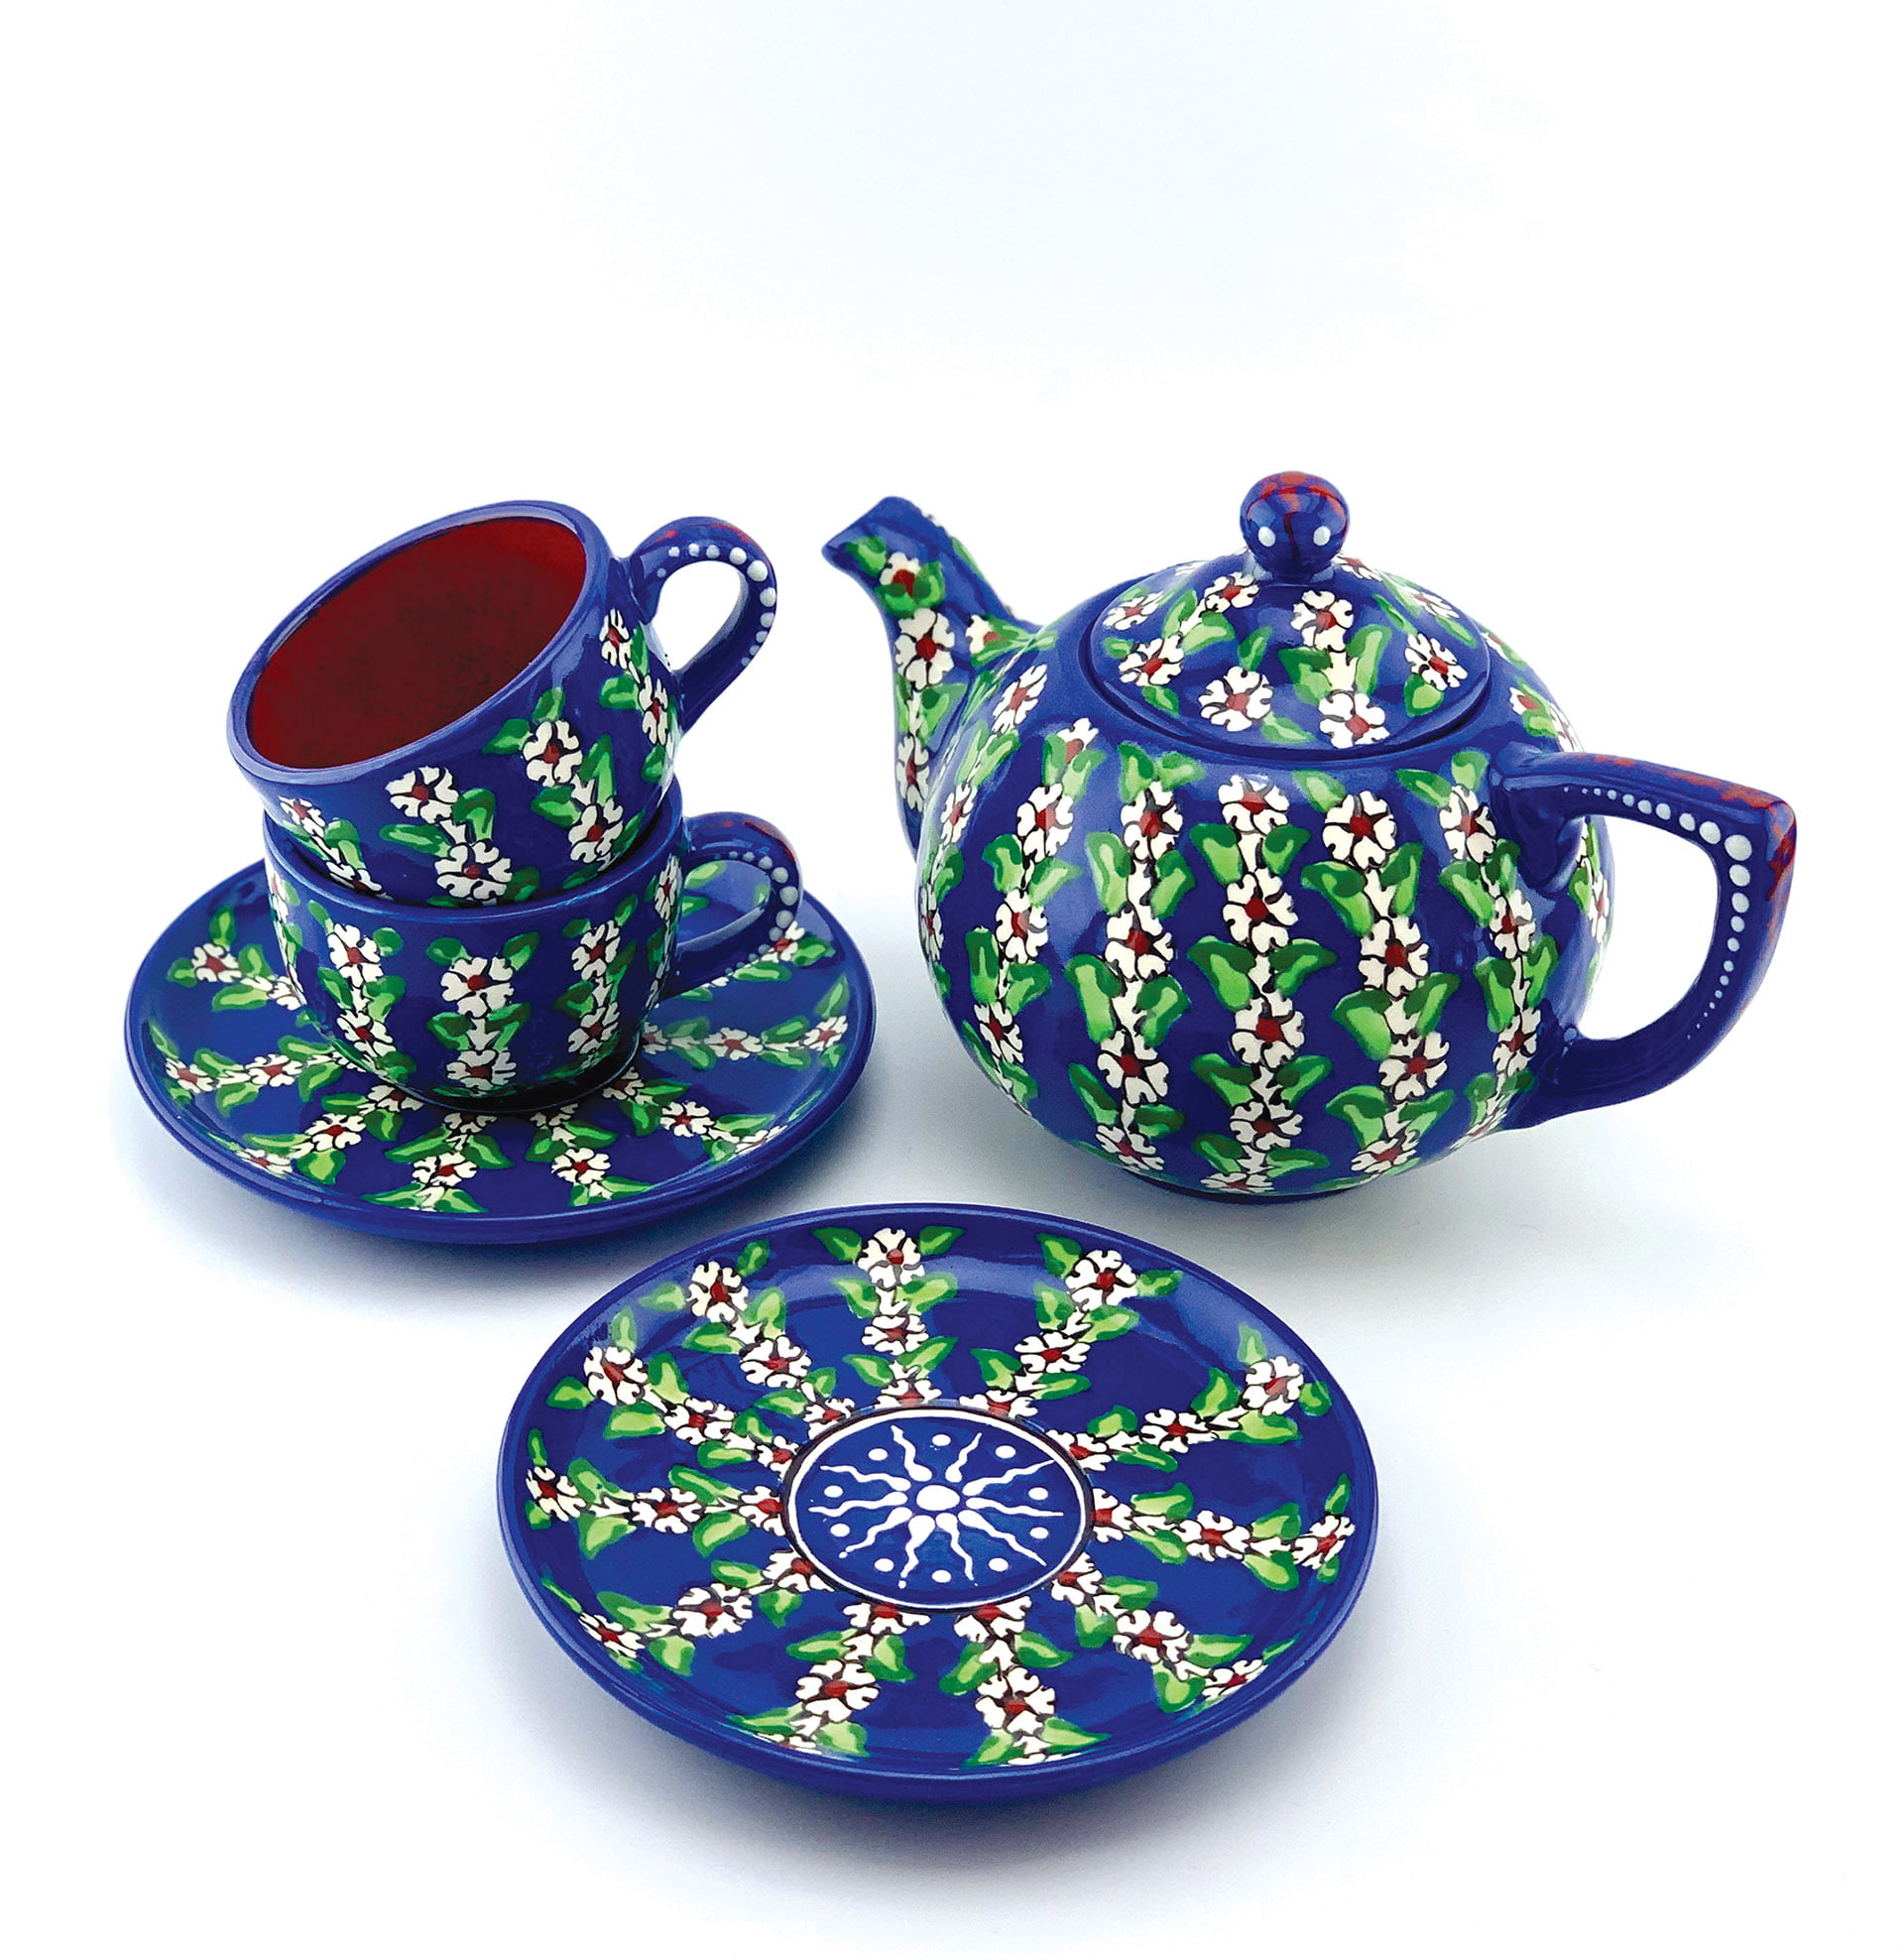 Tableware patterns are derived from the artist's native Kurdistan.